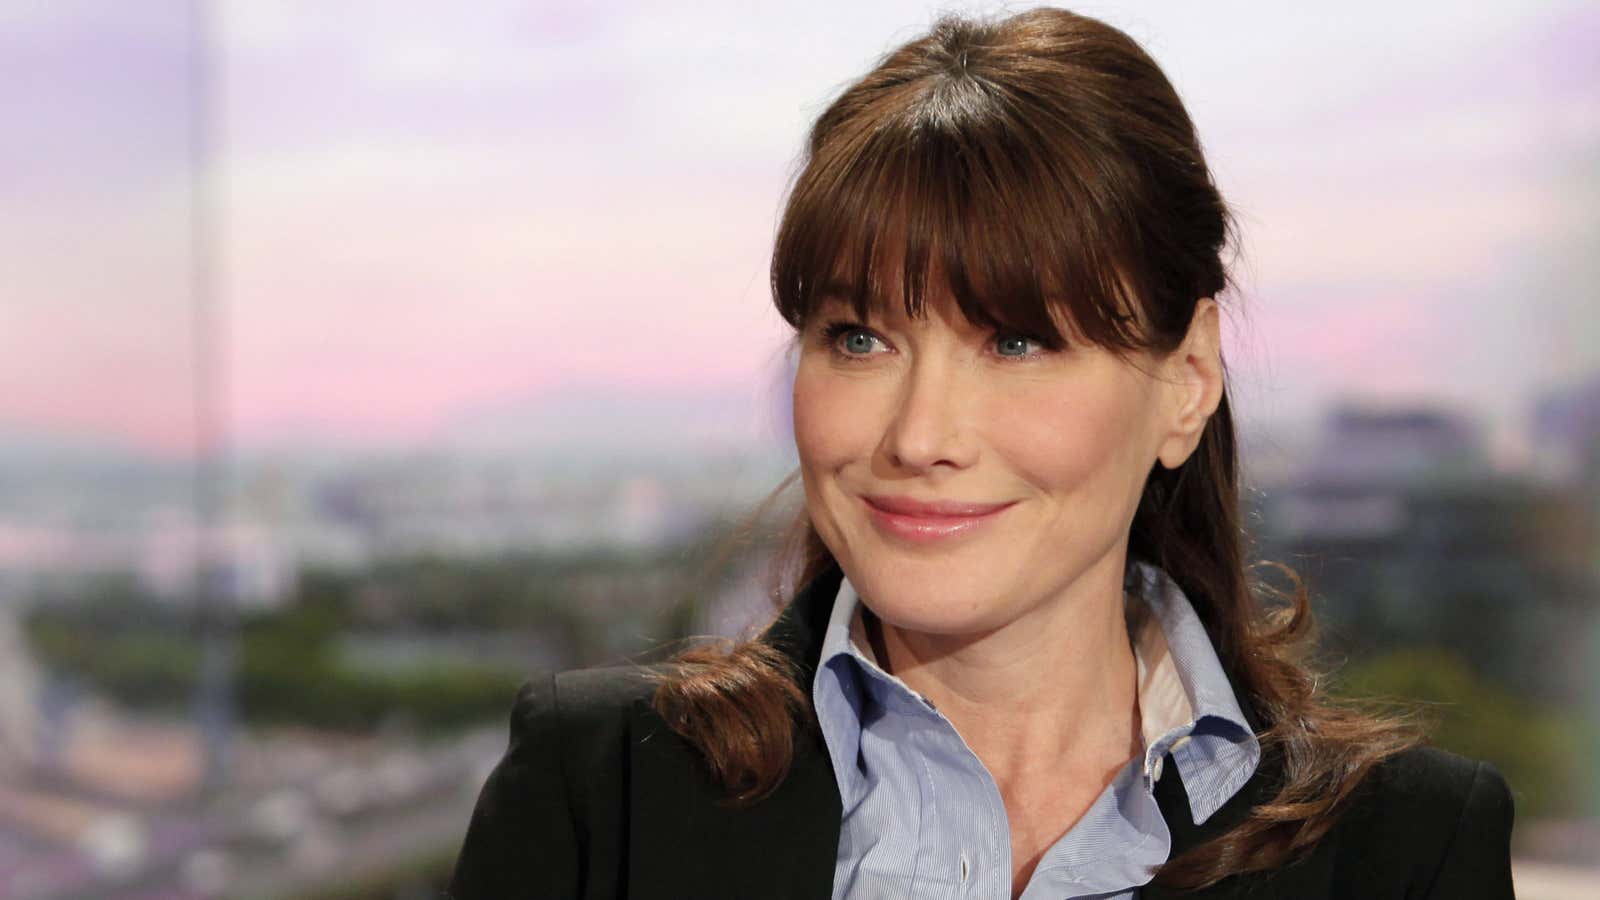 Carla Bruni-Sarkozy really stepped in it this time.